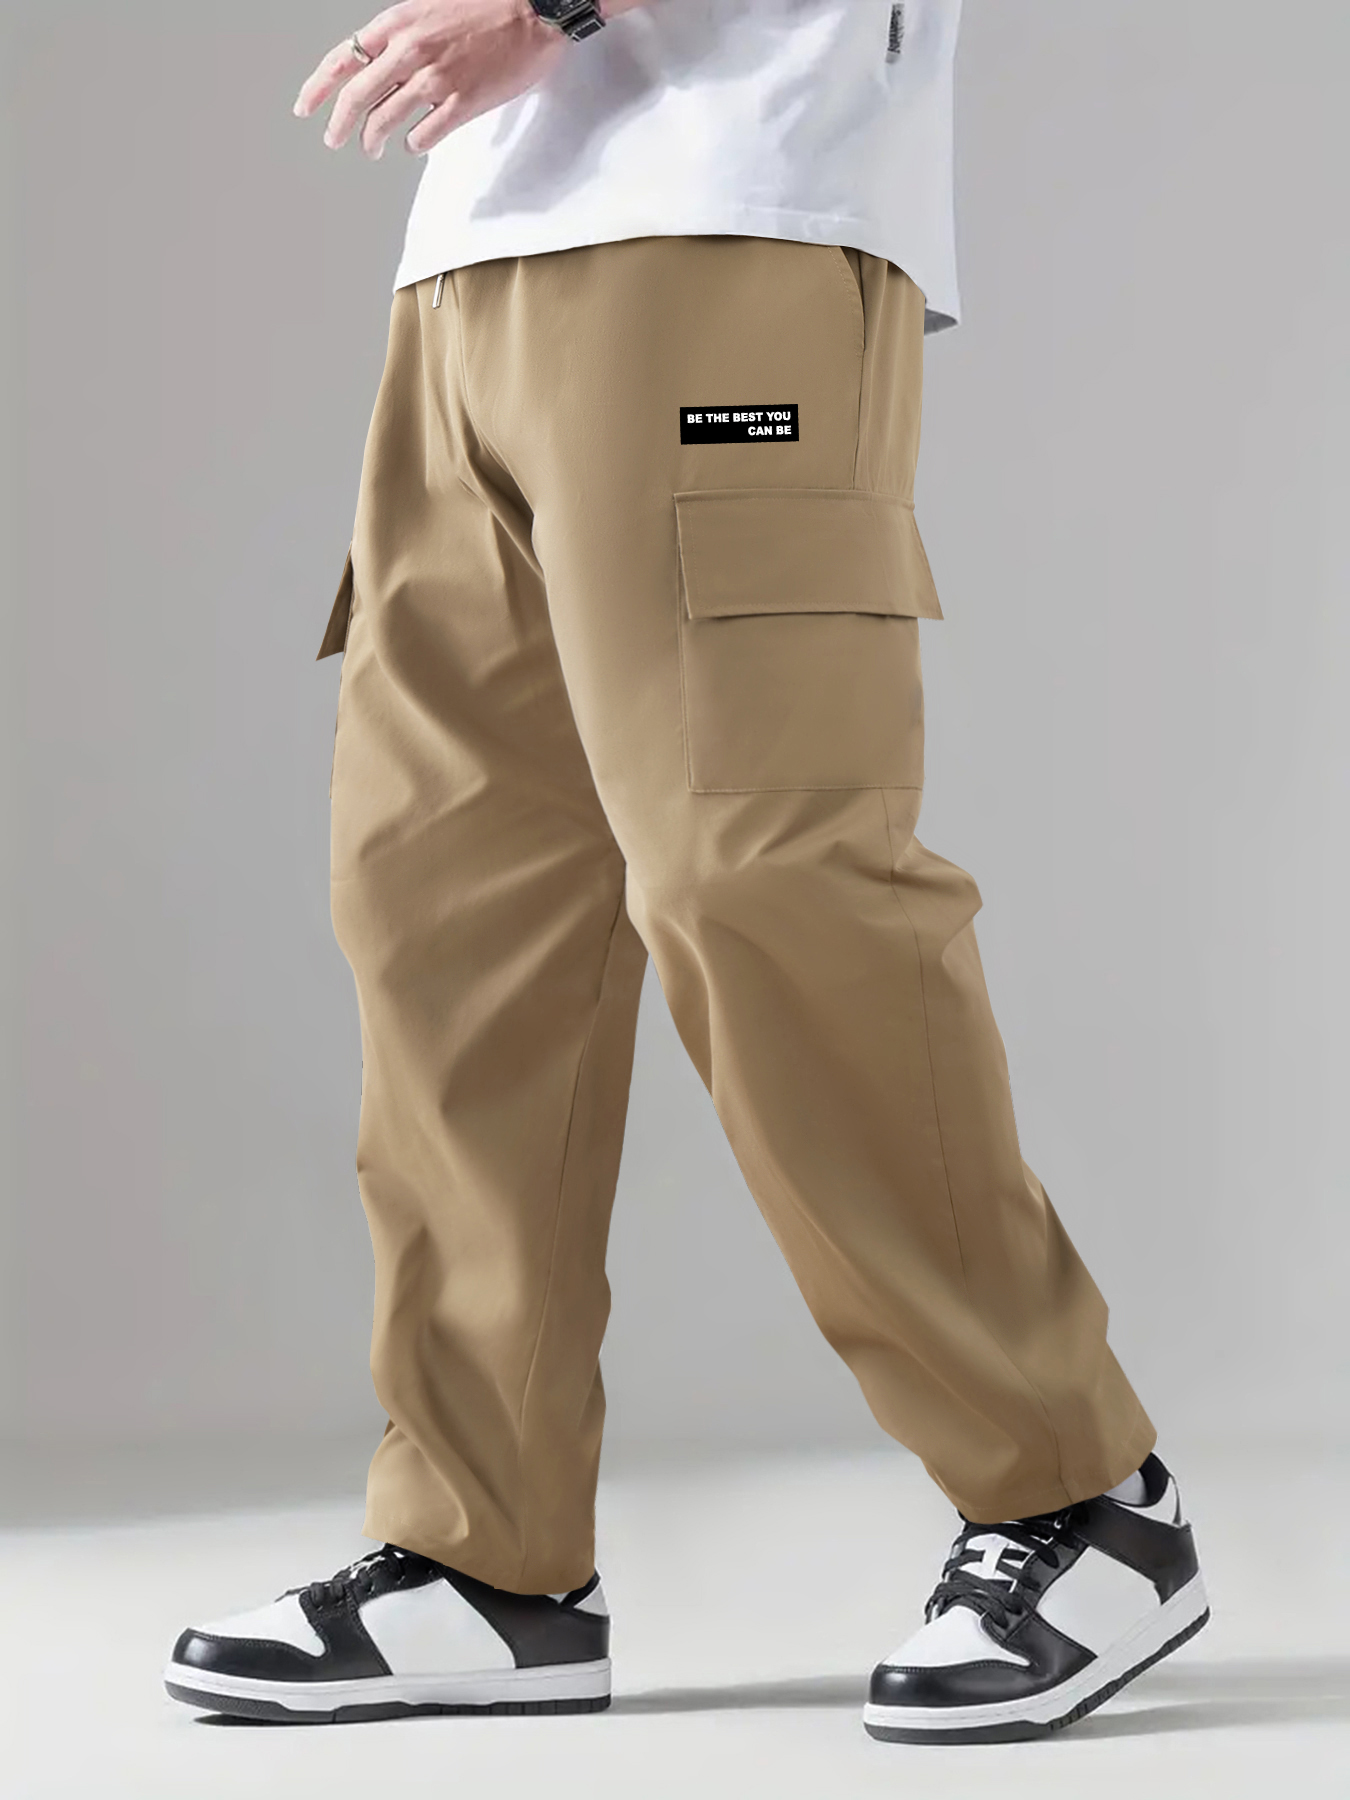 Top Quality Cargo Pants For Men, Men's Collection